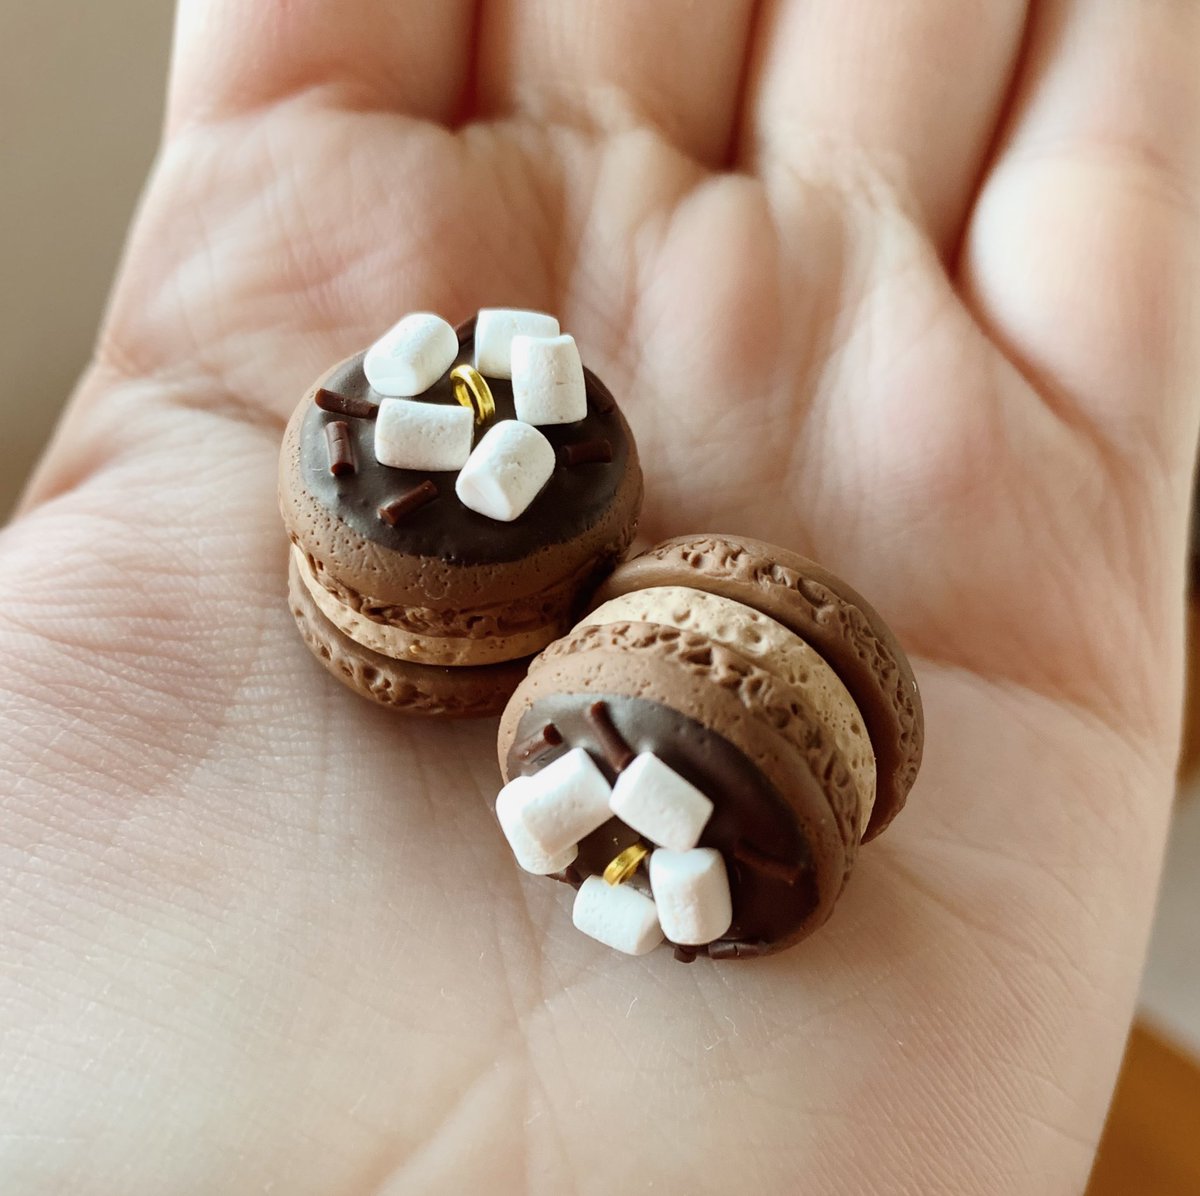 getting back into the swing of things with some early morning prototyping… hot cocoa macarons?